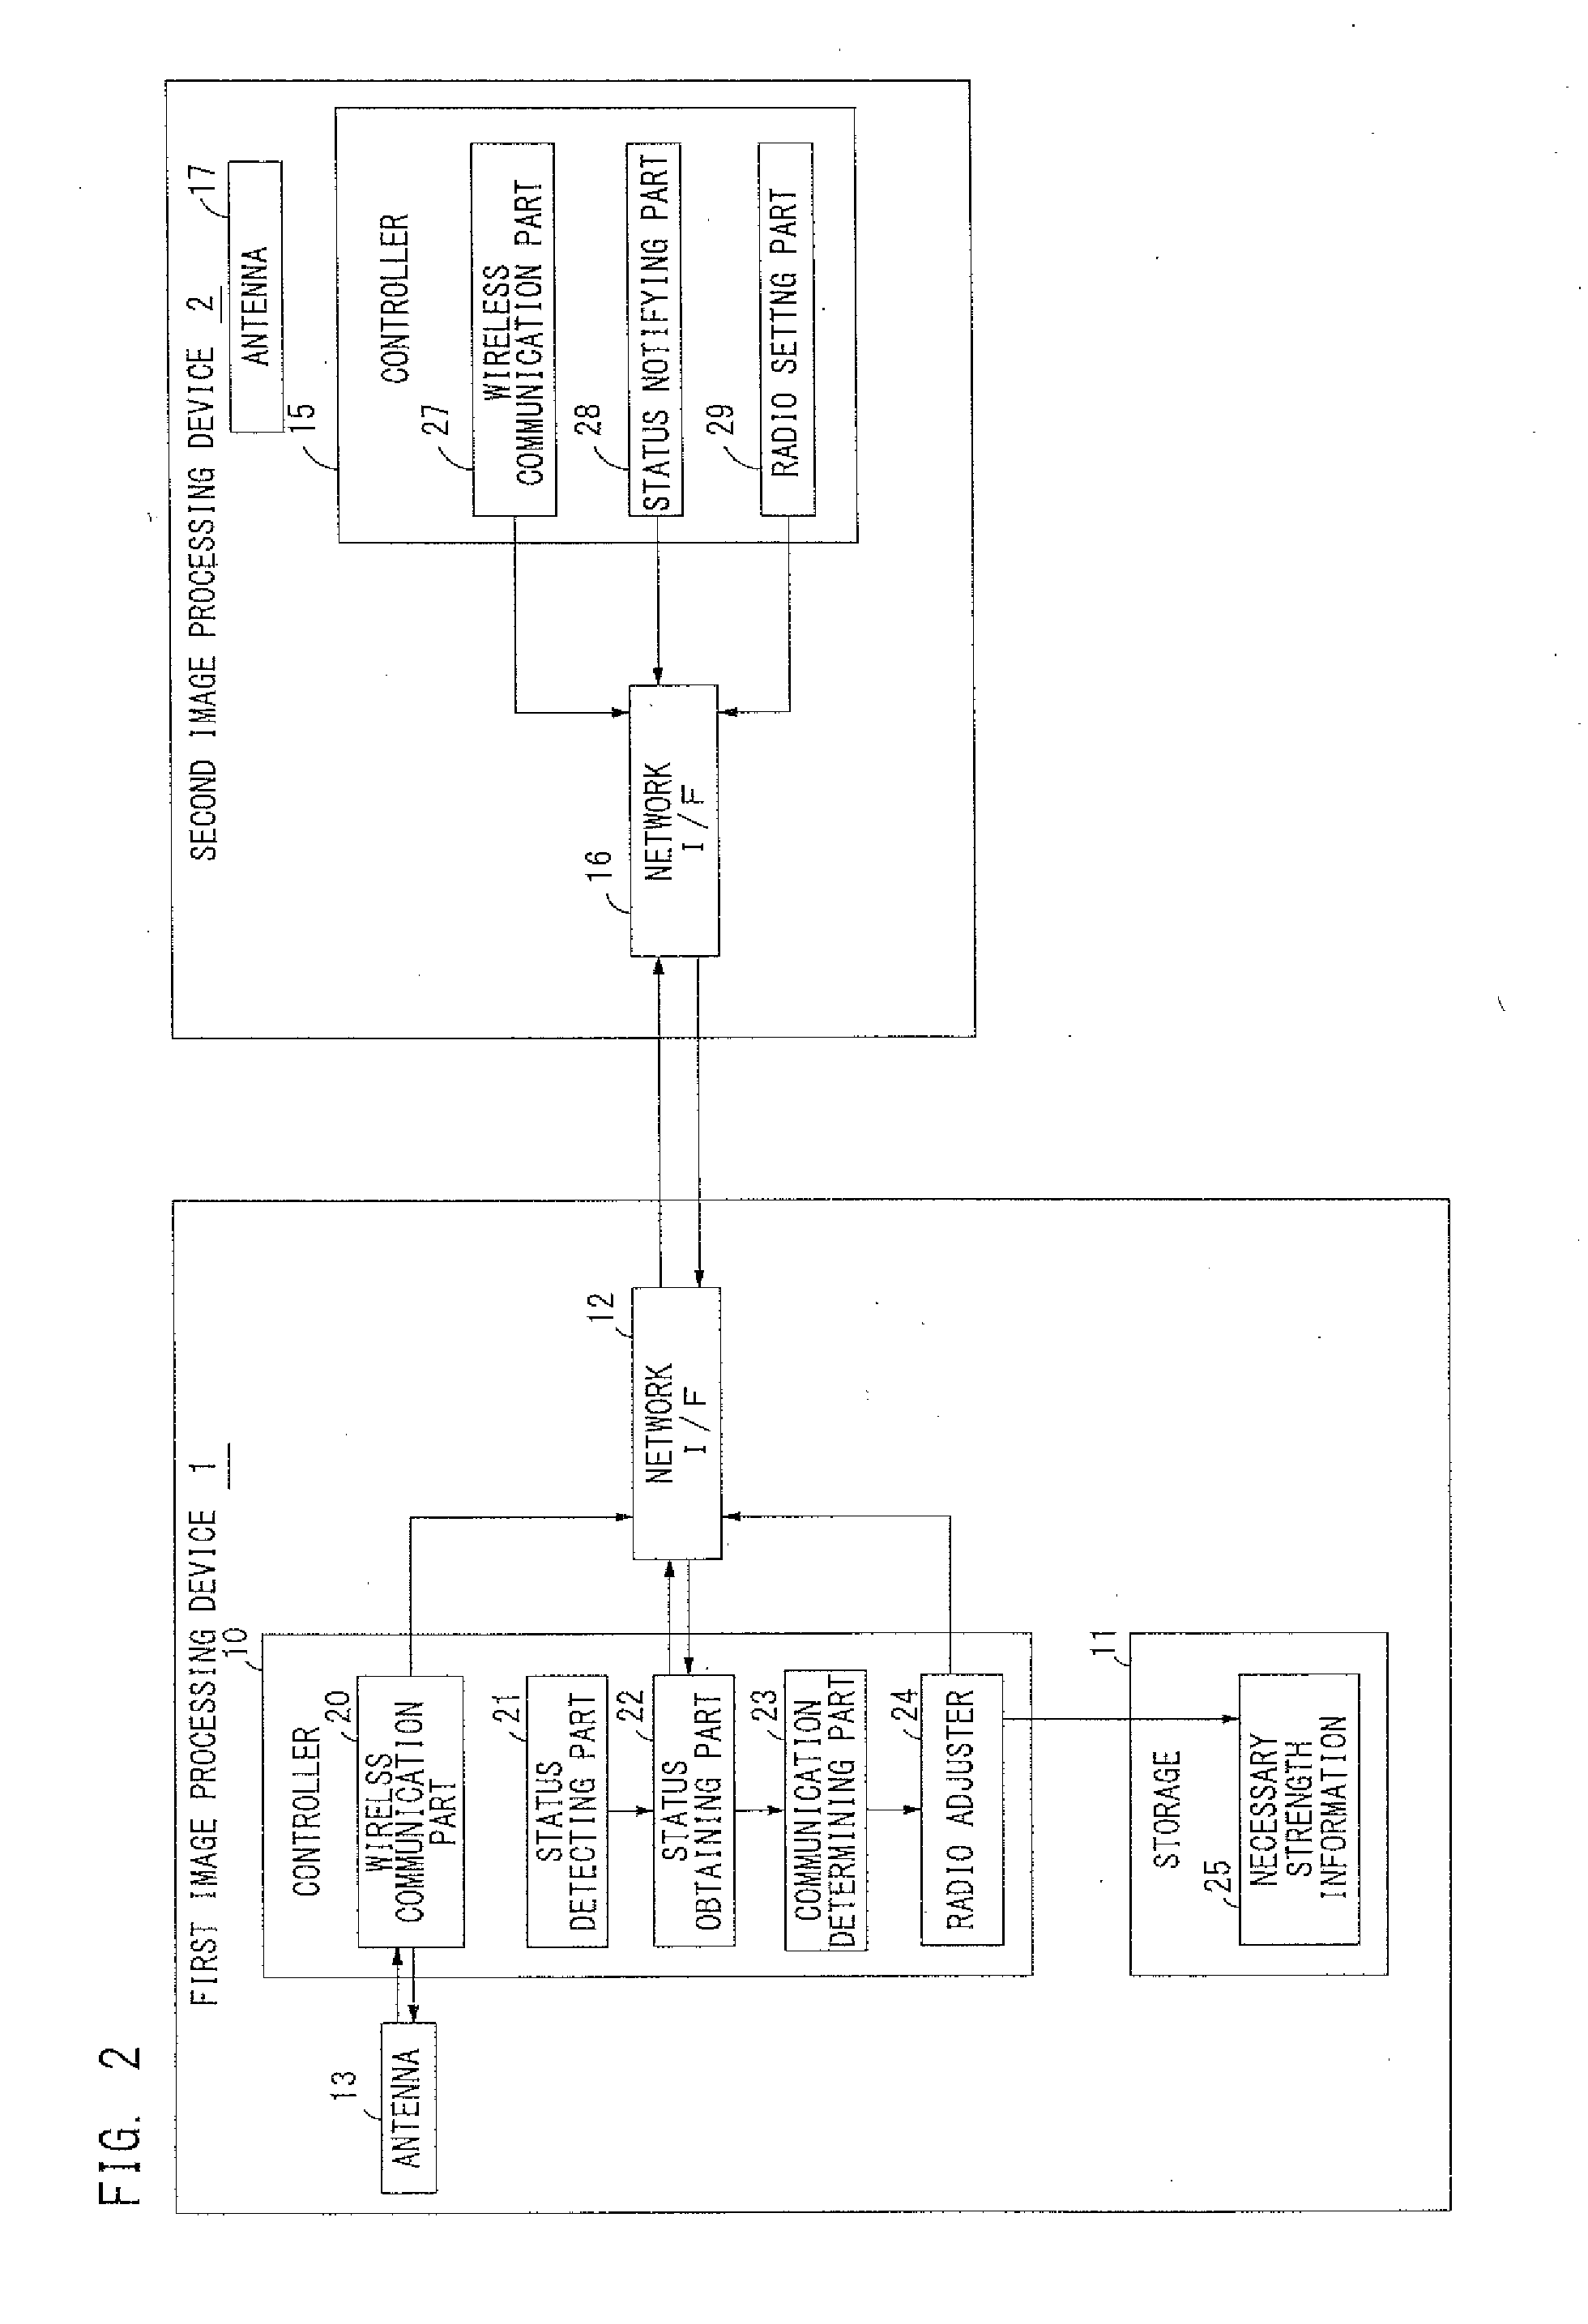 Image processing system, image processing device, non-transitory computer readable recording medium and processing device